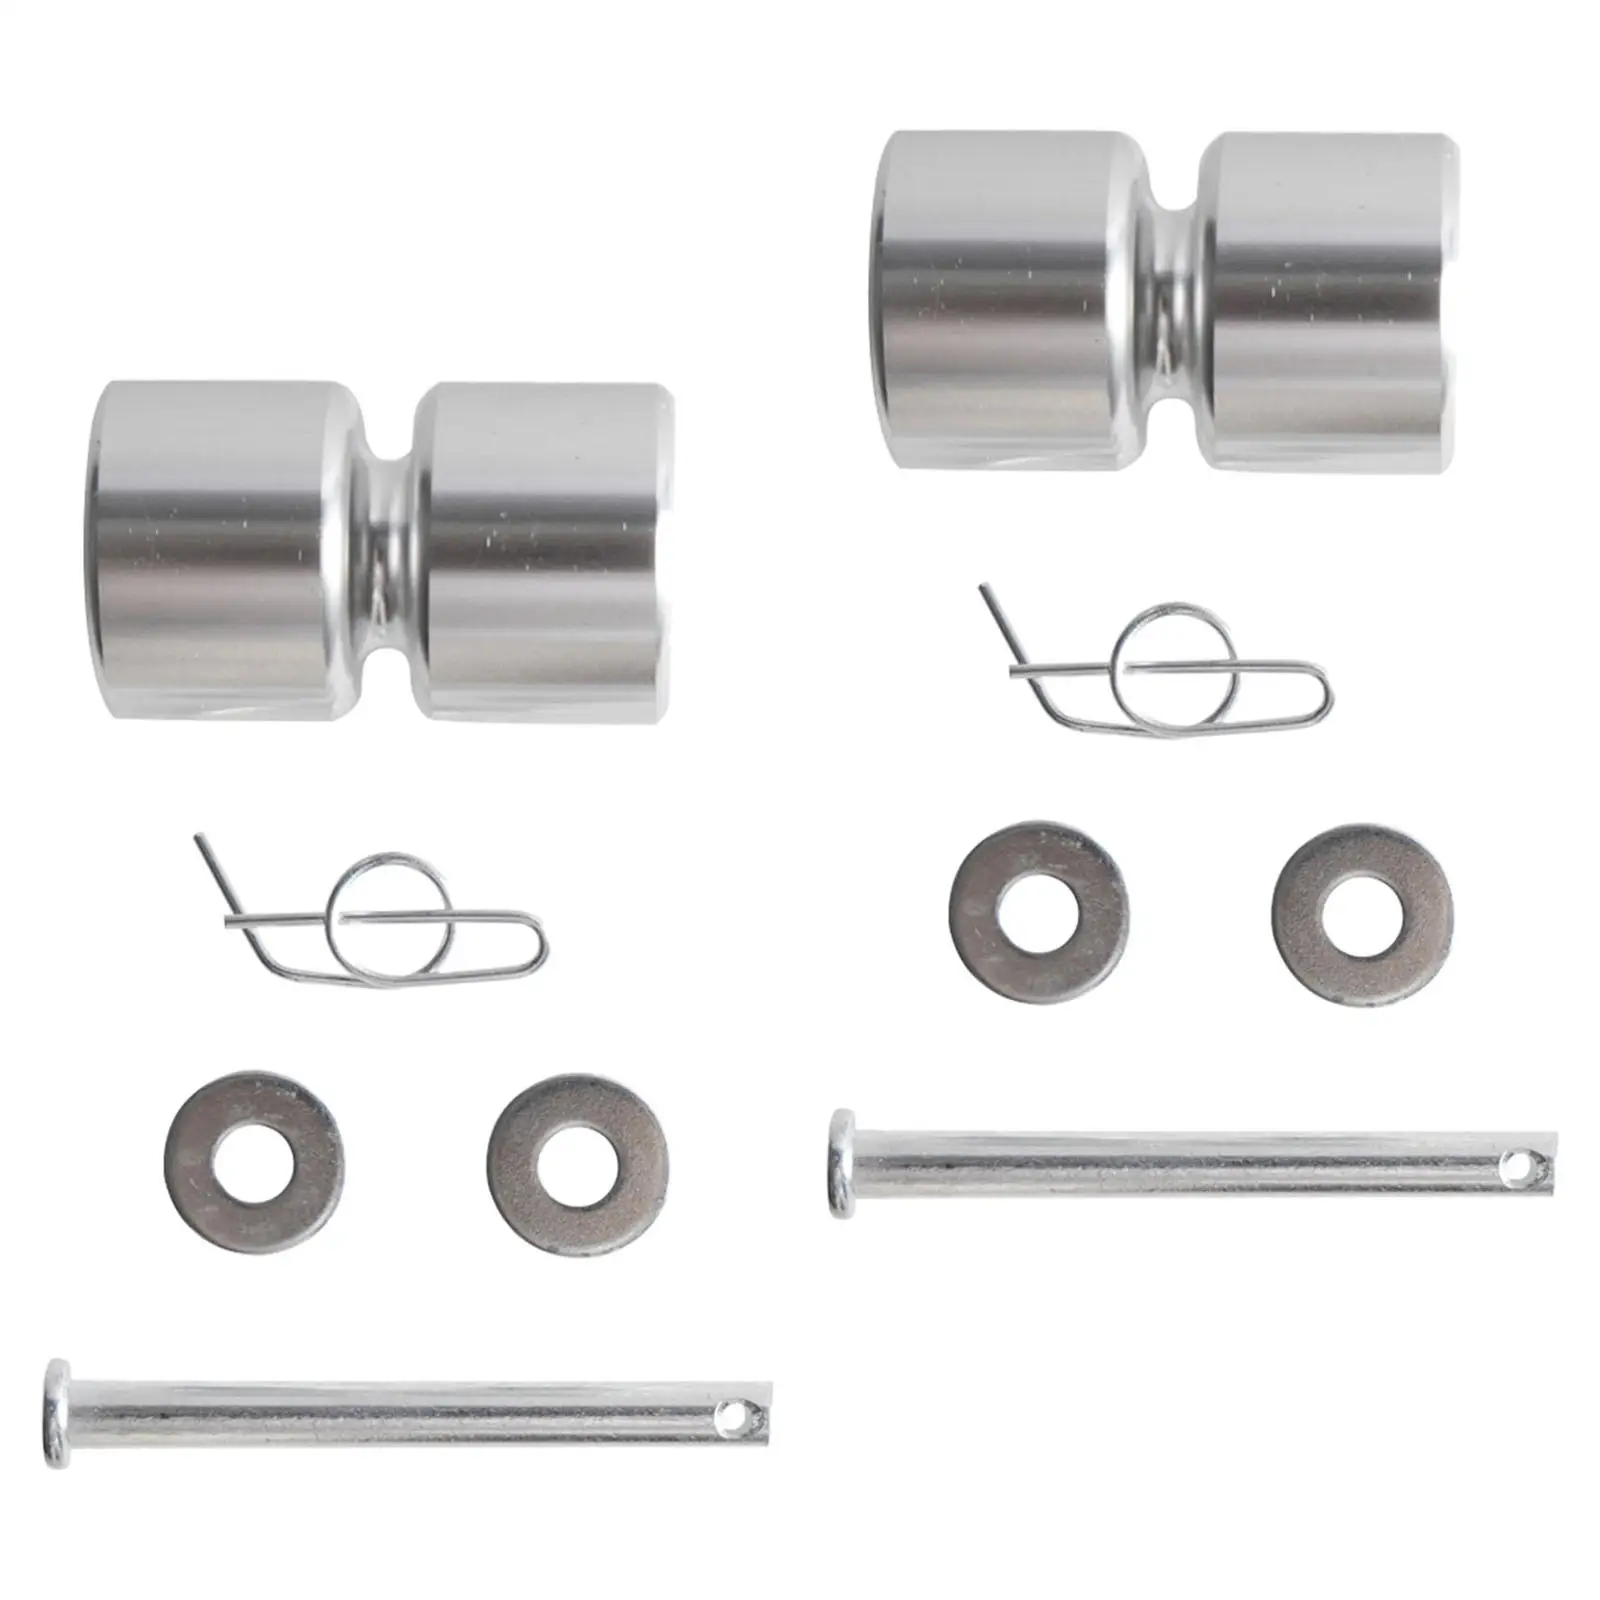 Aluminum Alloy Trailer Tailgate Lift Assist Rollers Kit Fittings High Strength